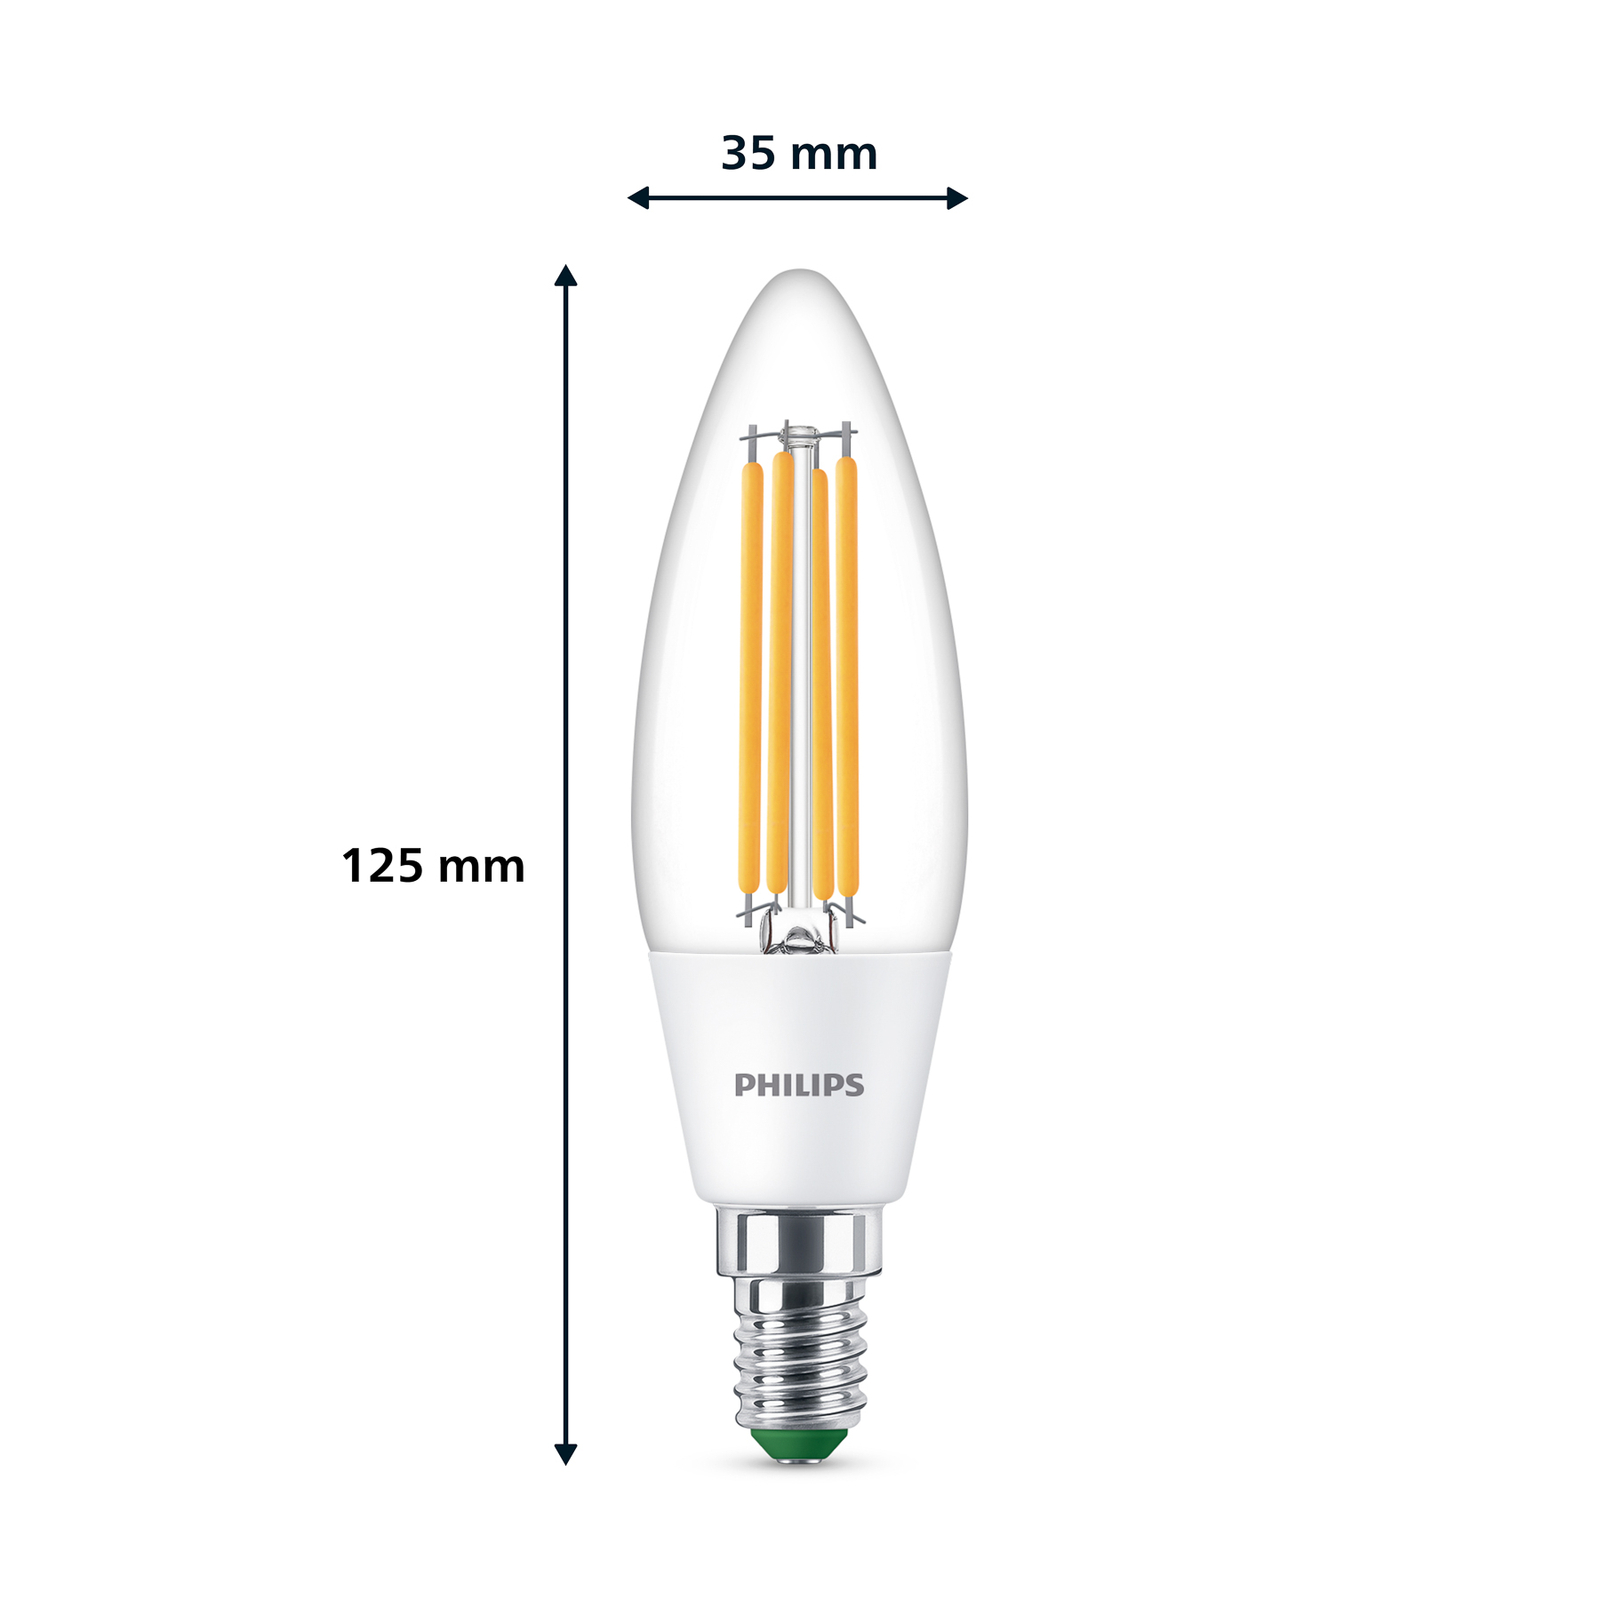 Philips bougie LED E14 2,3 W 485 lm claire 4 000 K